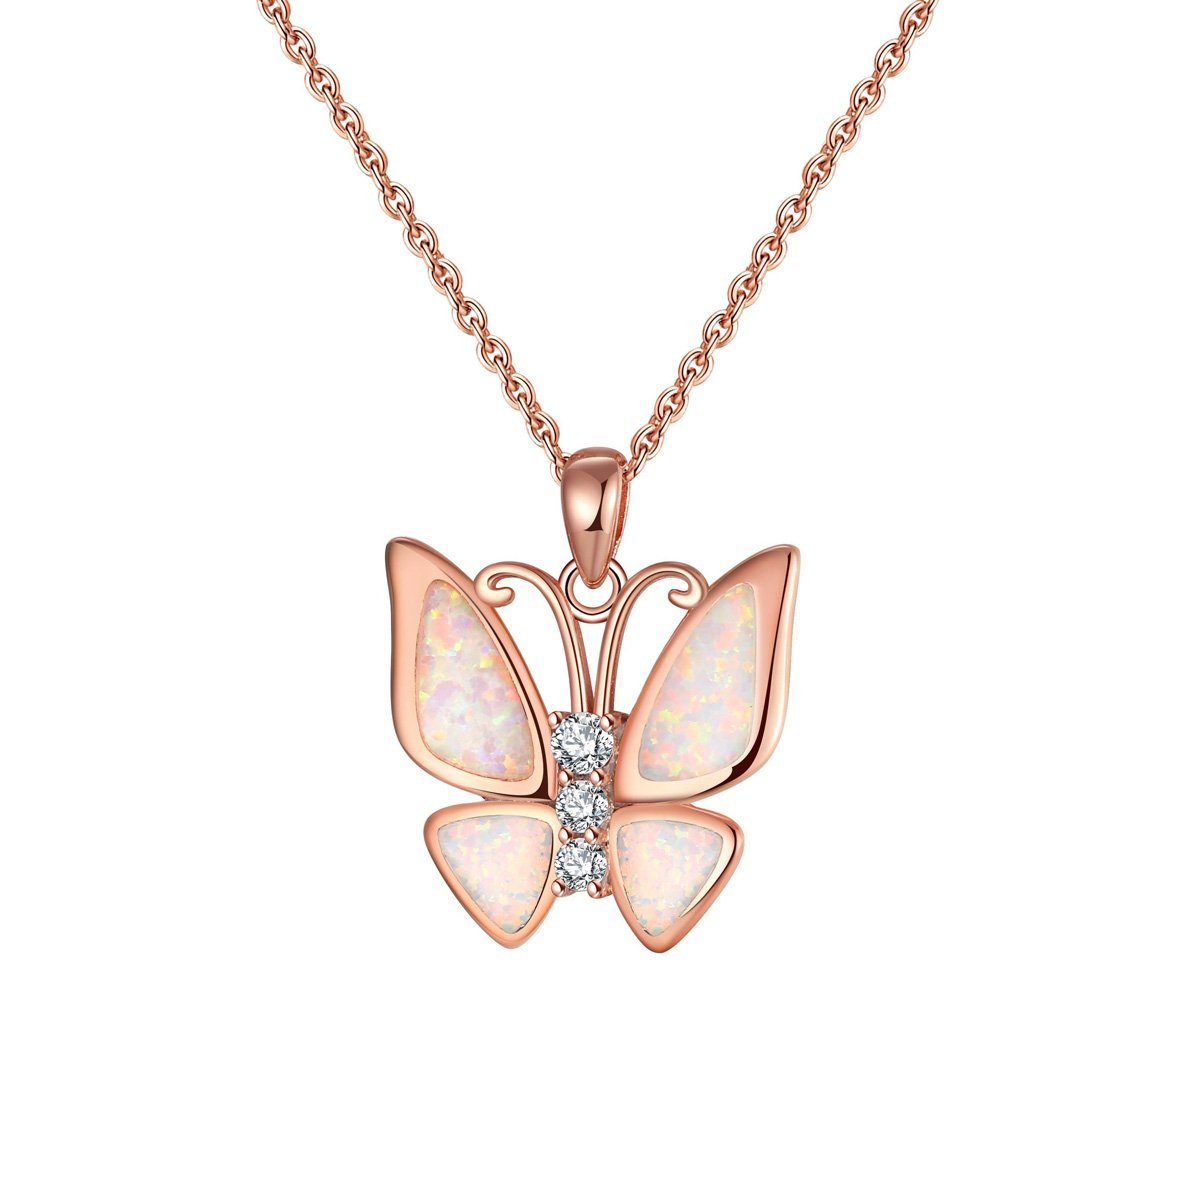 Dear Daughter, Spread Your Wings - Fire Opal Butterfly Necklace Gift Set